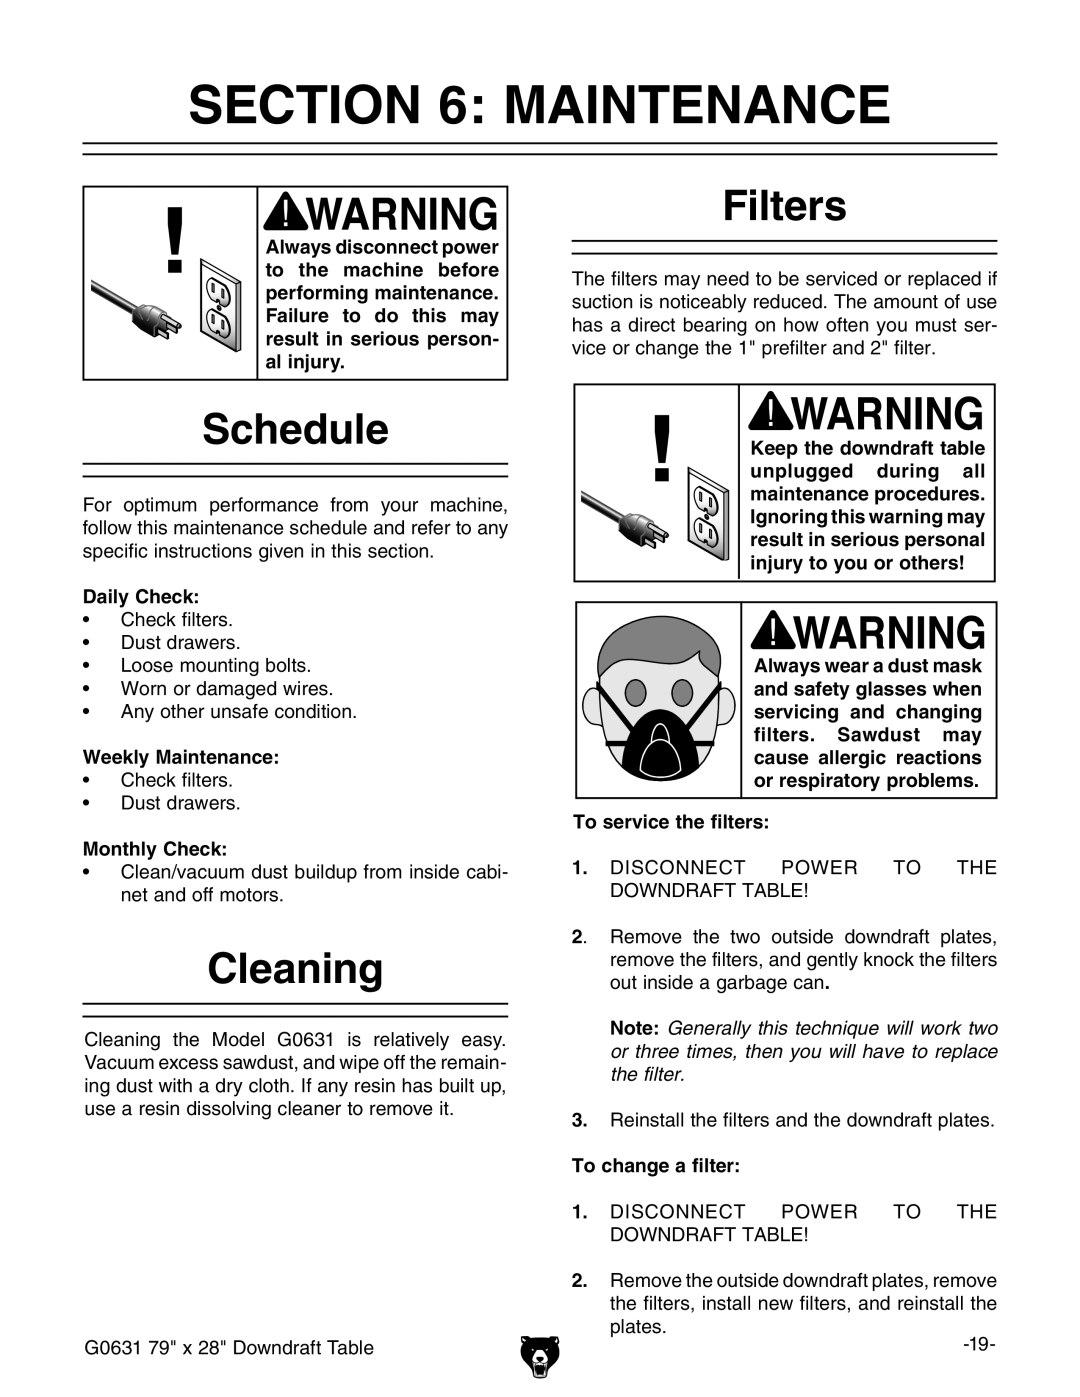 Grizzly G0631 owner manual Maintenance, Schedule, Cleaning, Filters 